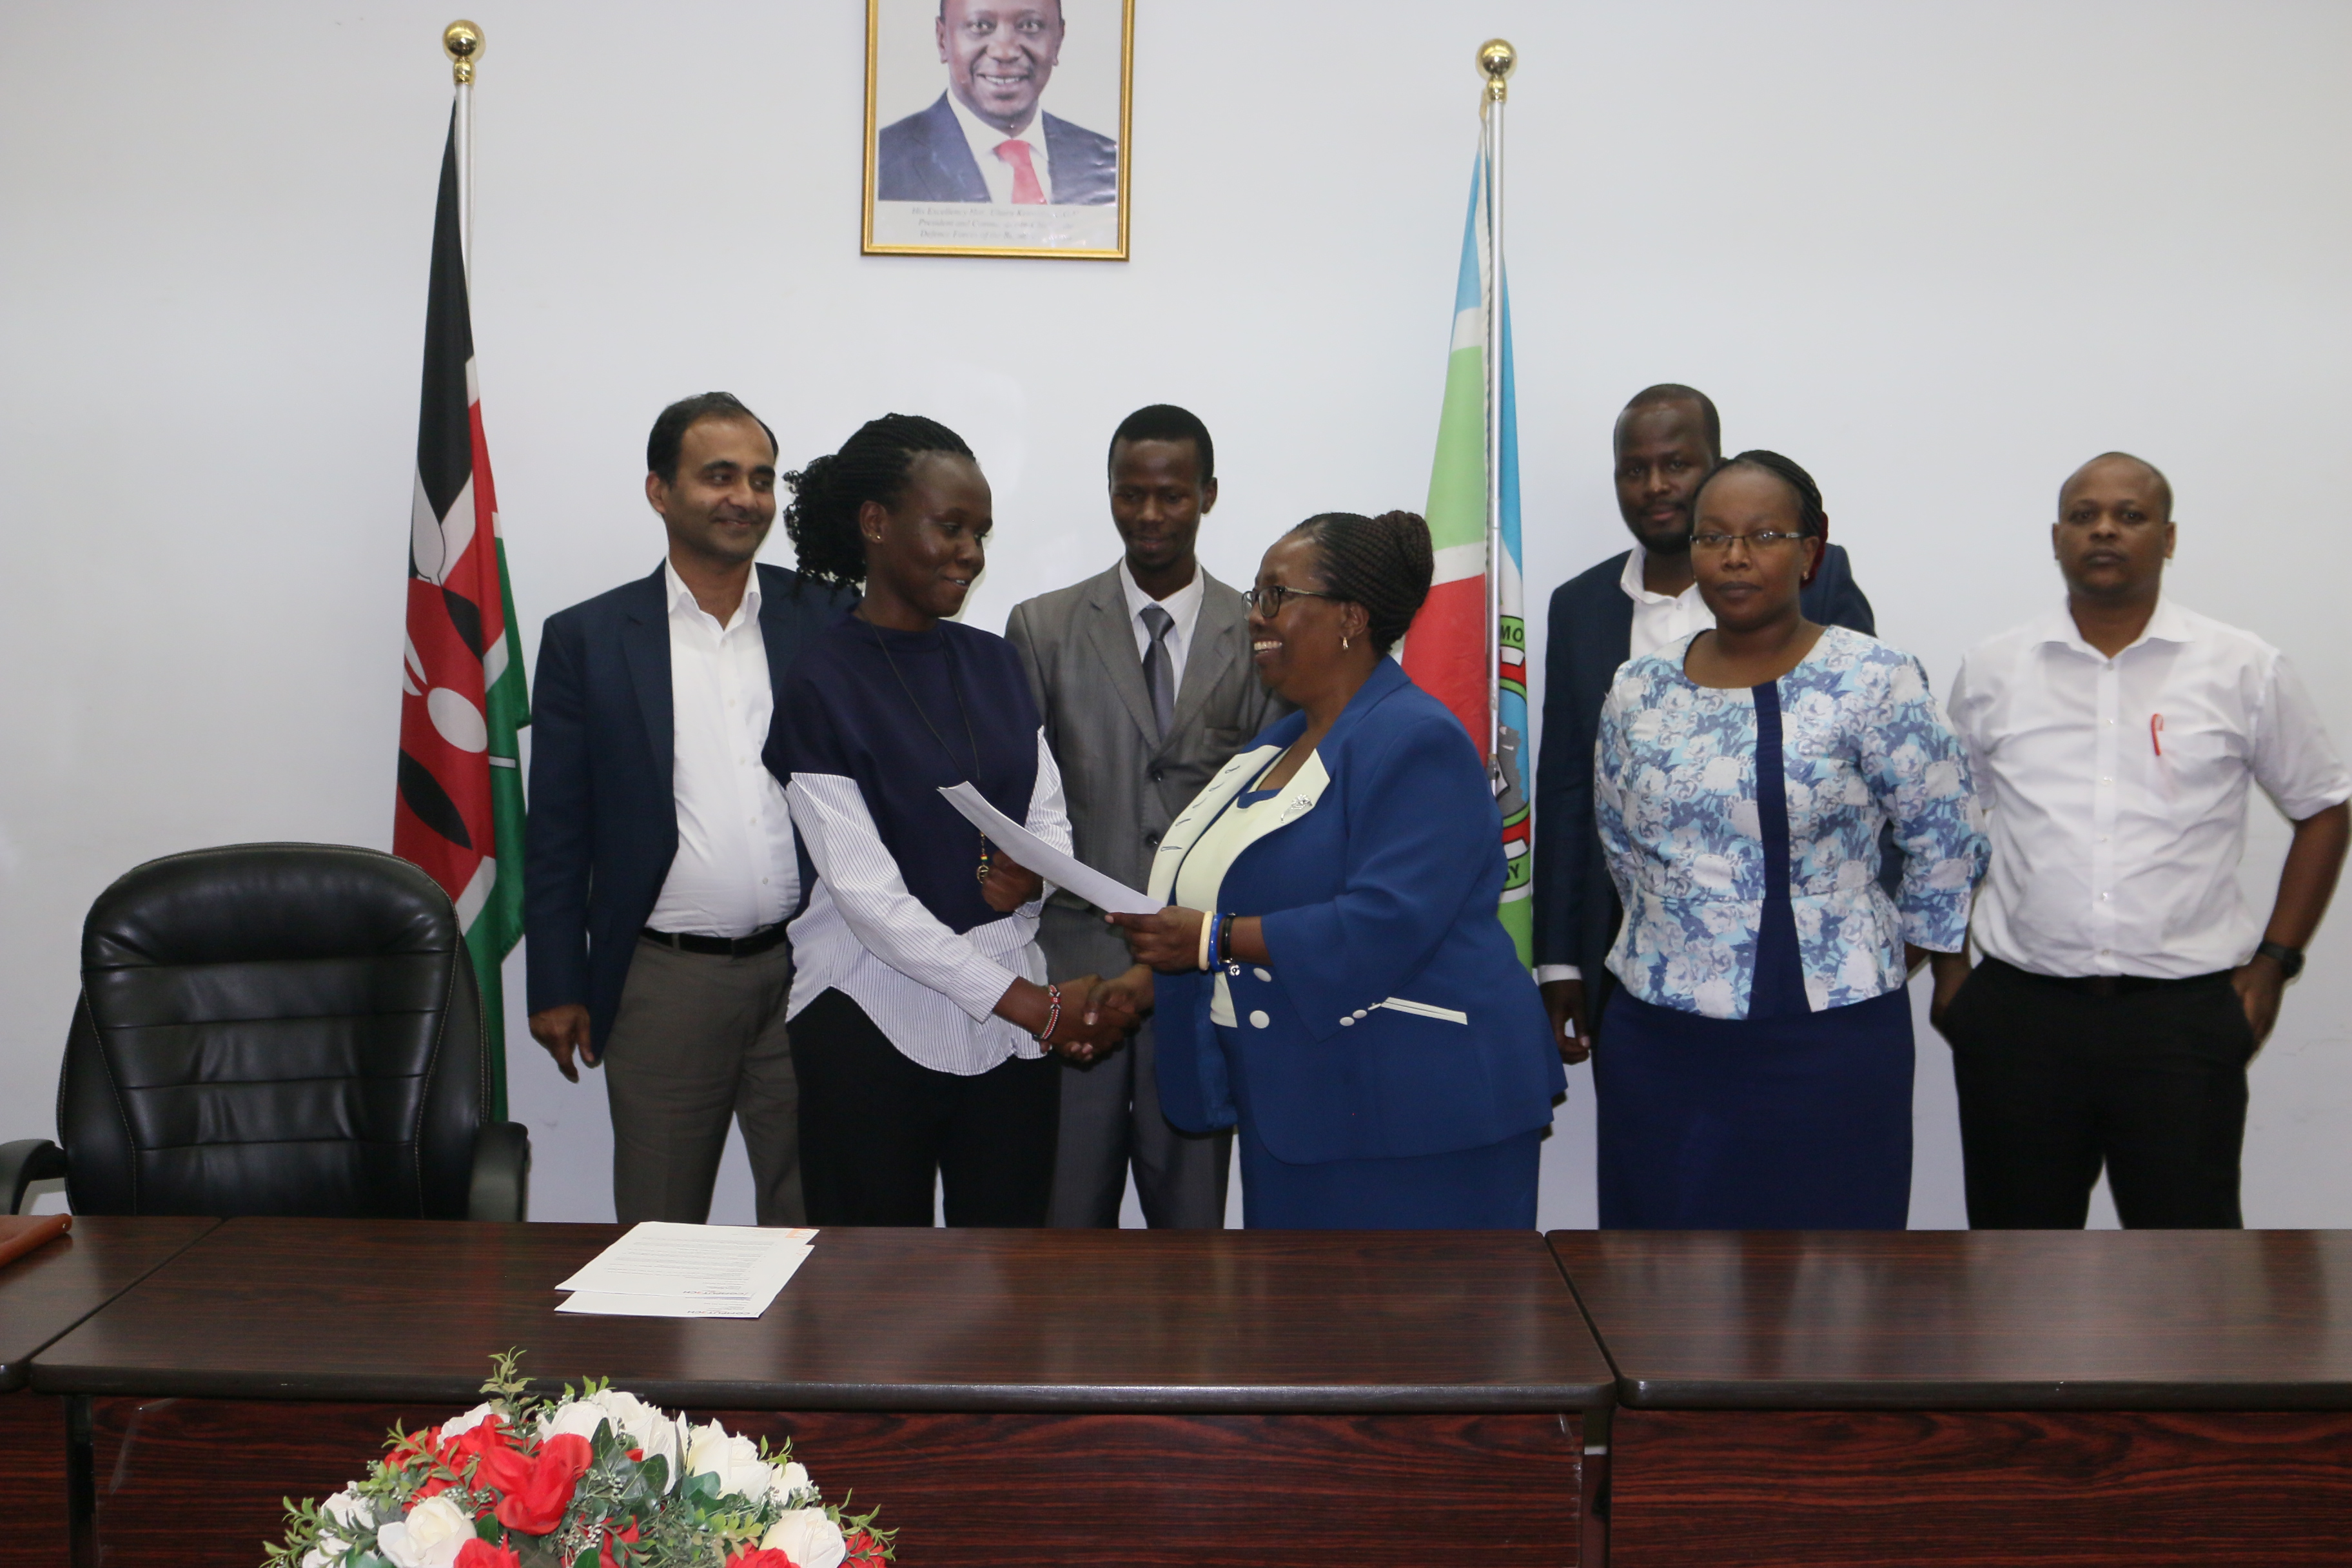 VC Prof. Victoria Ngumi presents a certificate to one of the students, Ms. Lesli Bonyo.